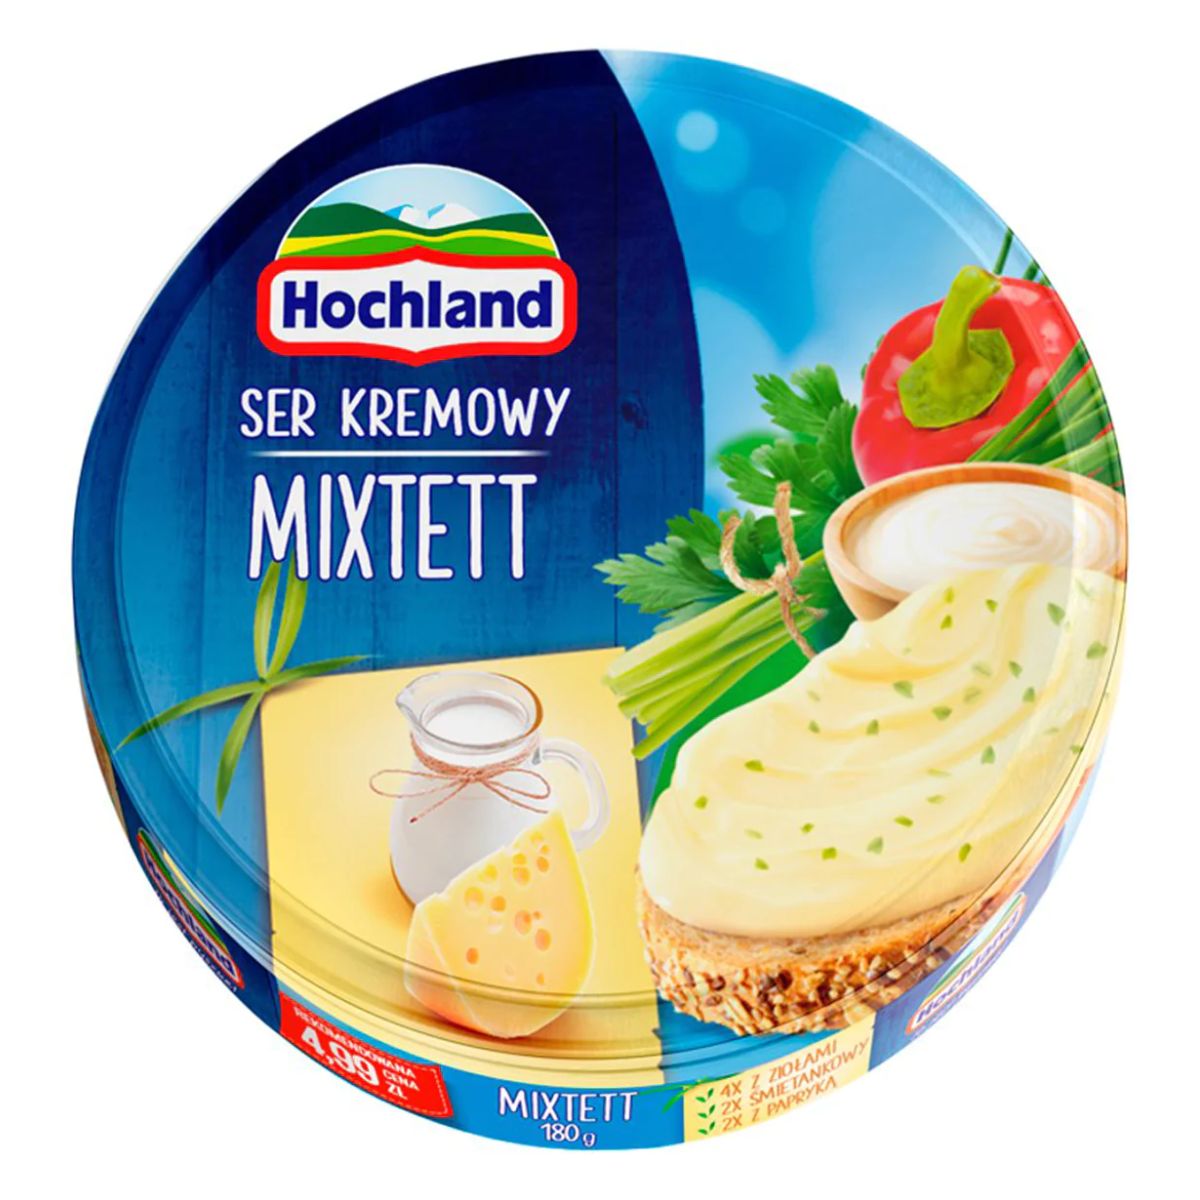 A round container of Hochland - Mixtett Cream Cheese - 180g with images of cheese slices, a bell pepper, a jug of milk, and a baguette.